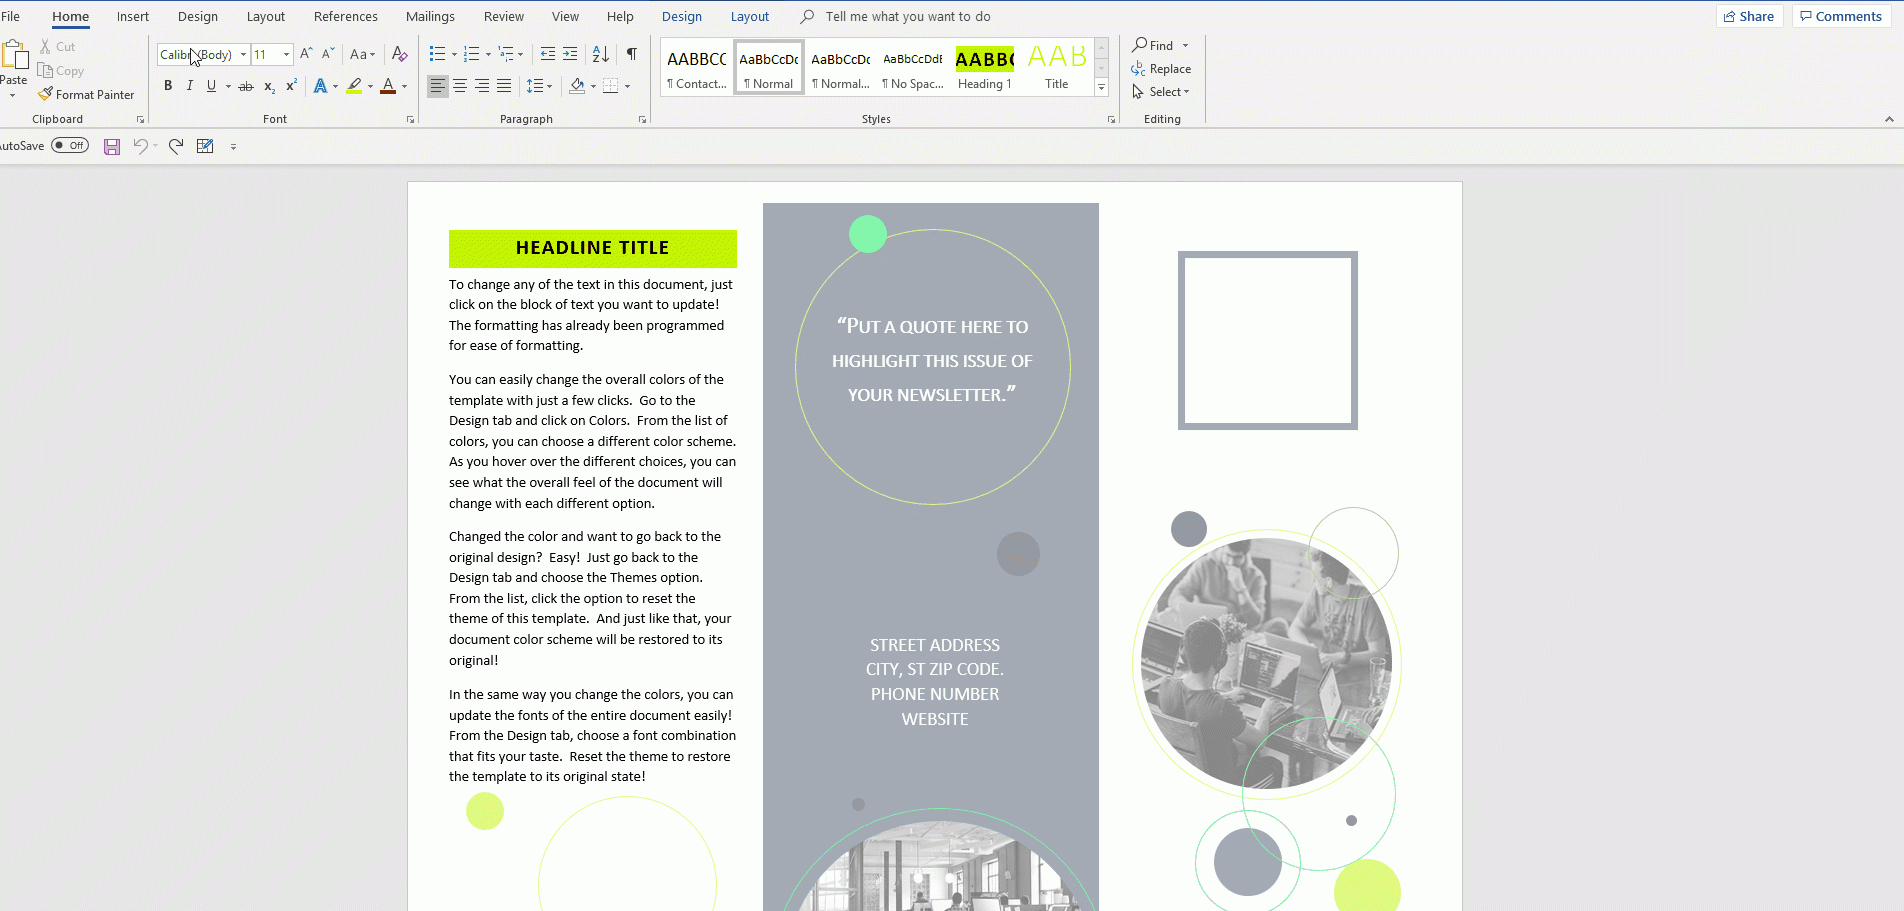 How To Make A Brochure On Microsoft Word – Pce Blog Throughout Brochure Template On Microsoft Word